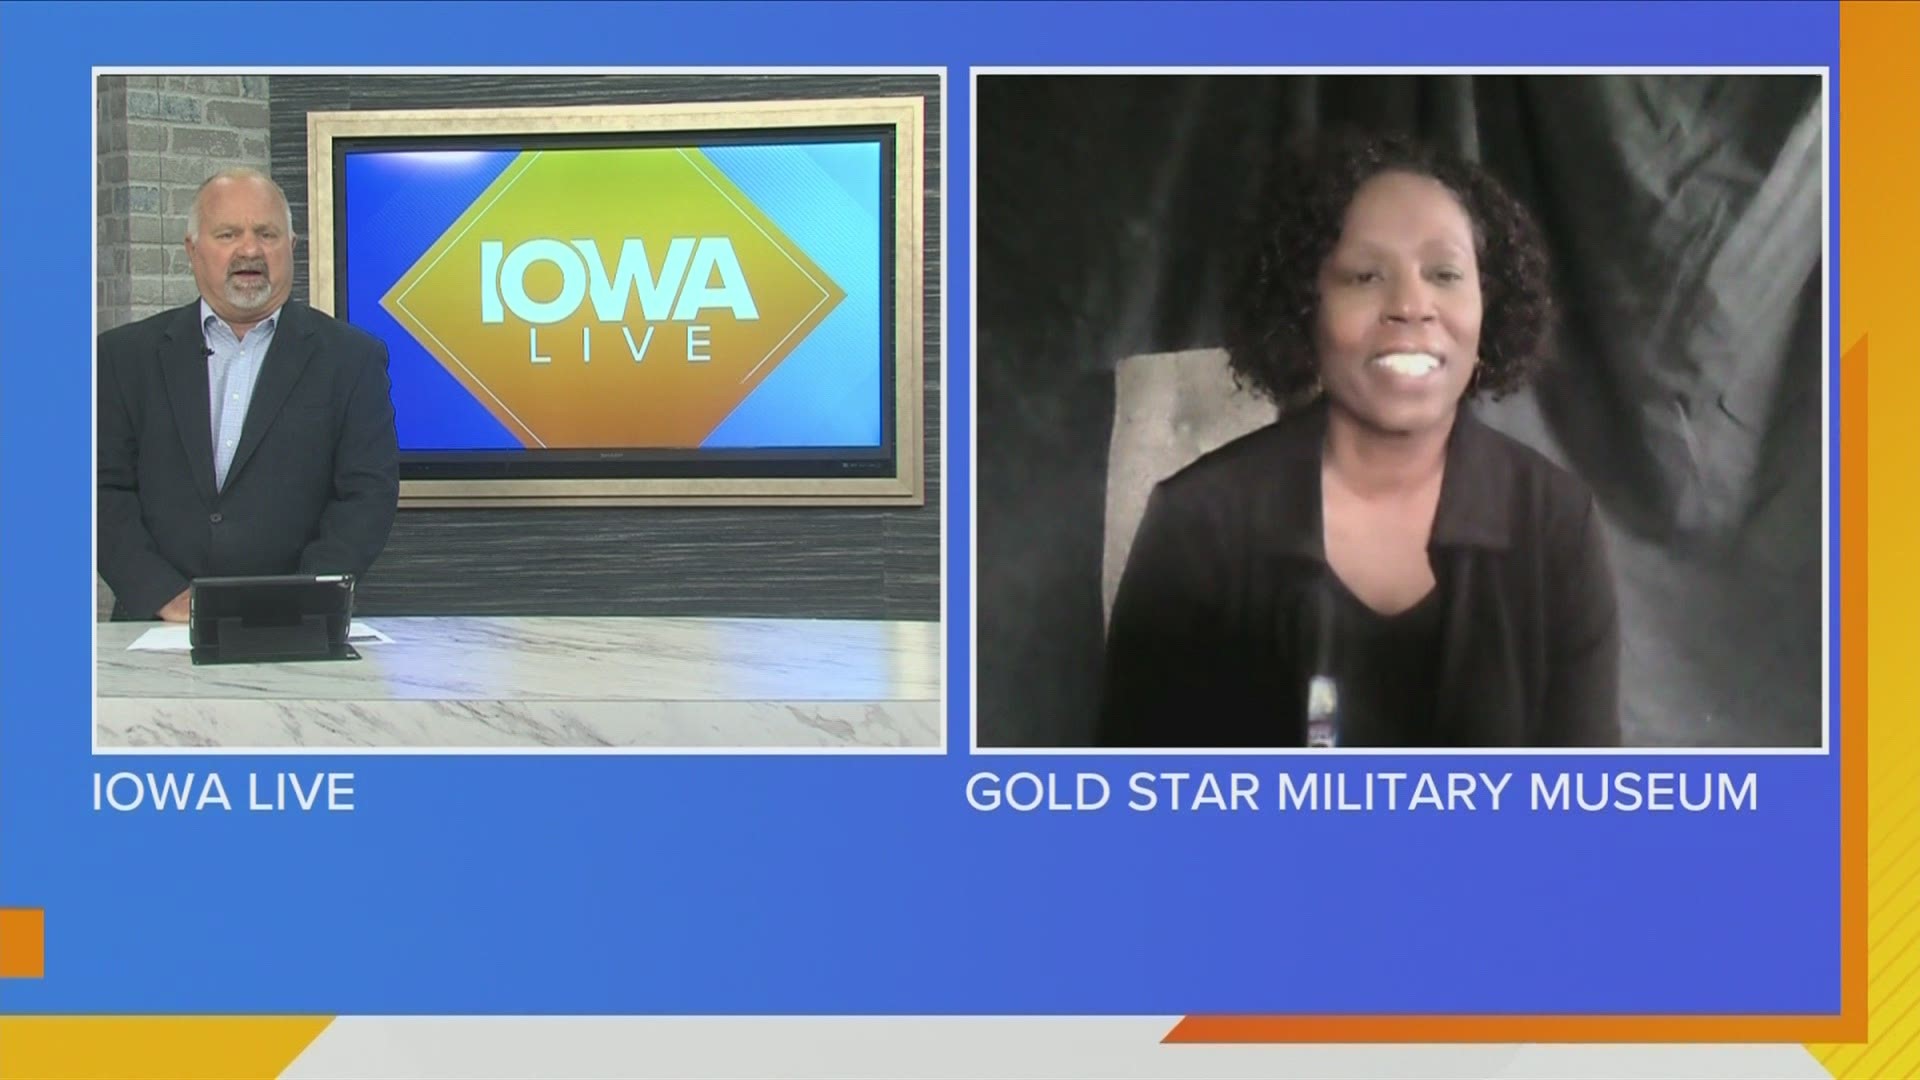 Iowa Gold Star Military Museum will NOT have in person events on Memorial Day this year but WILL have virtual activities and event on Facebook, YouTube & Website.